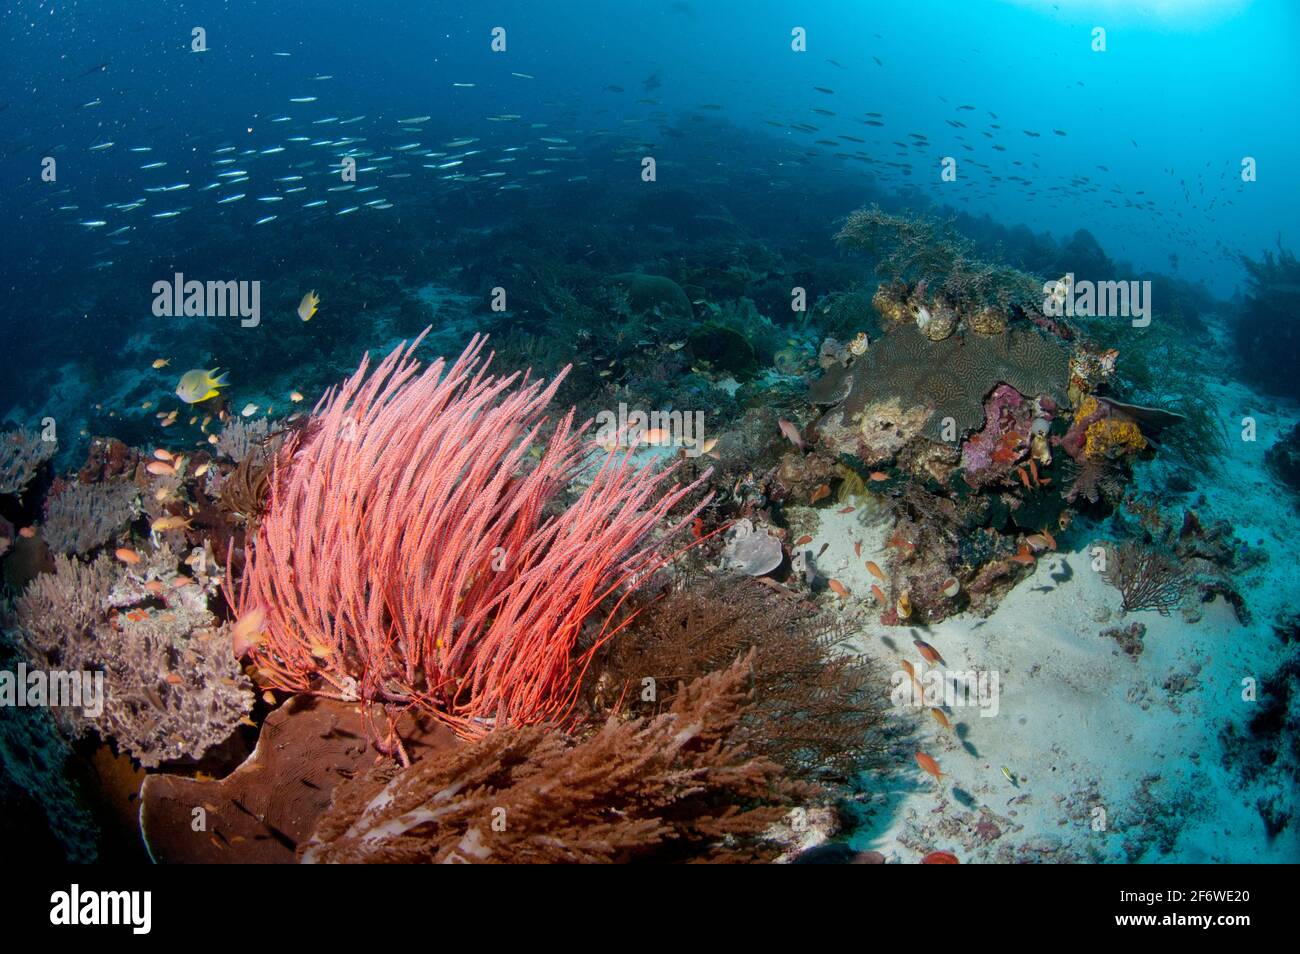 Red Whip Coral (Ellisella cercida) with school of fish (Actinopterygii Class) in background, Coral Gardens dive site, One Tree Island, near Fam Stock Photo